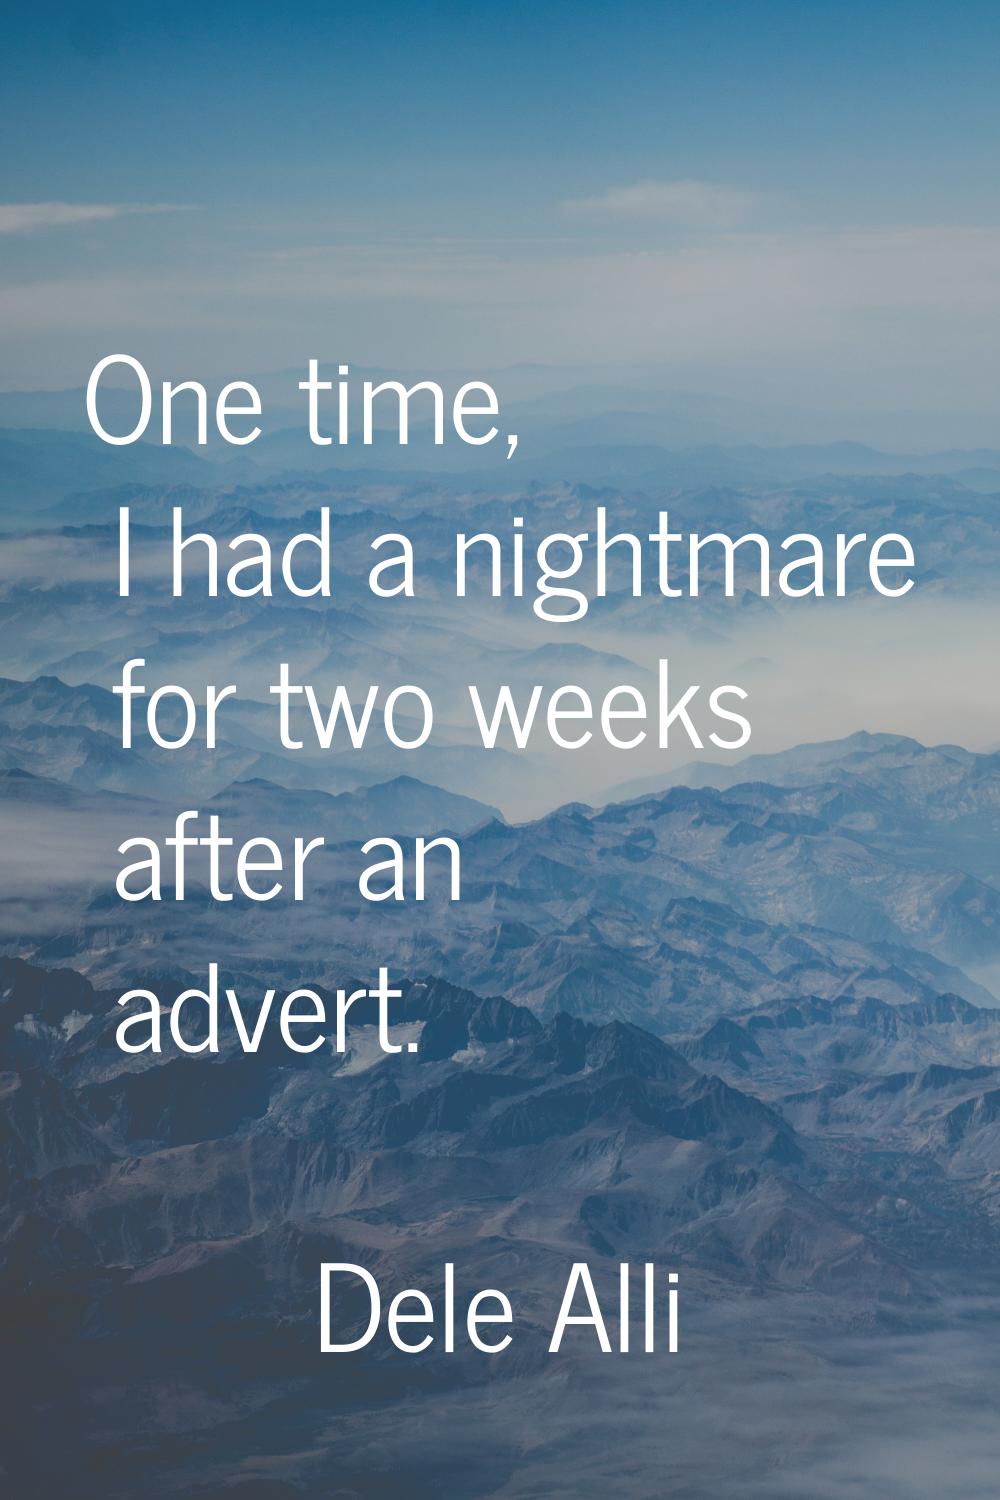 One time, I had a nightmare for two weeks after an advert.